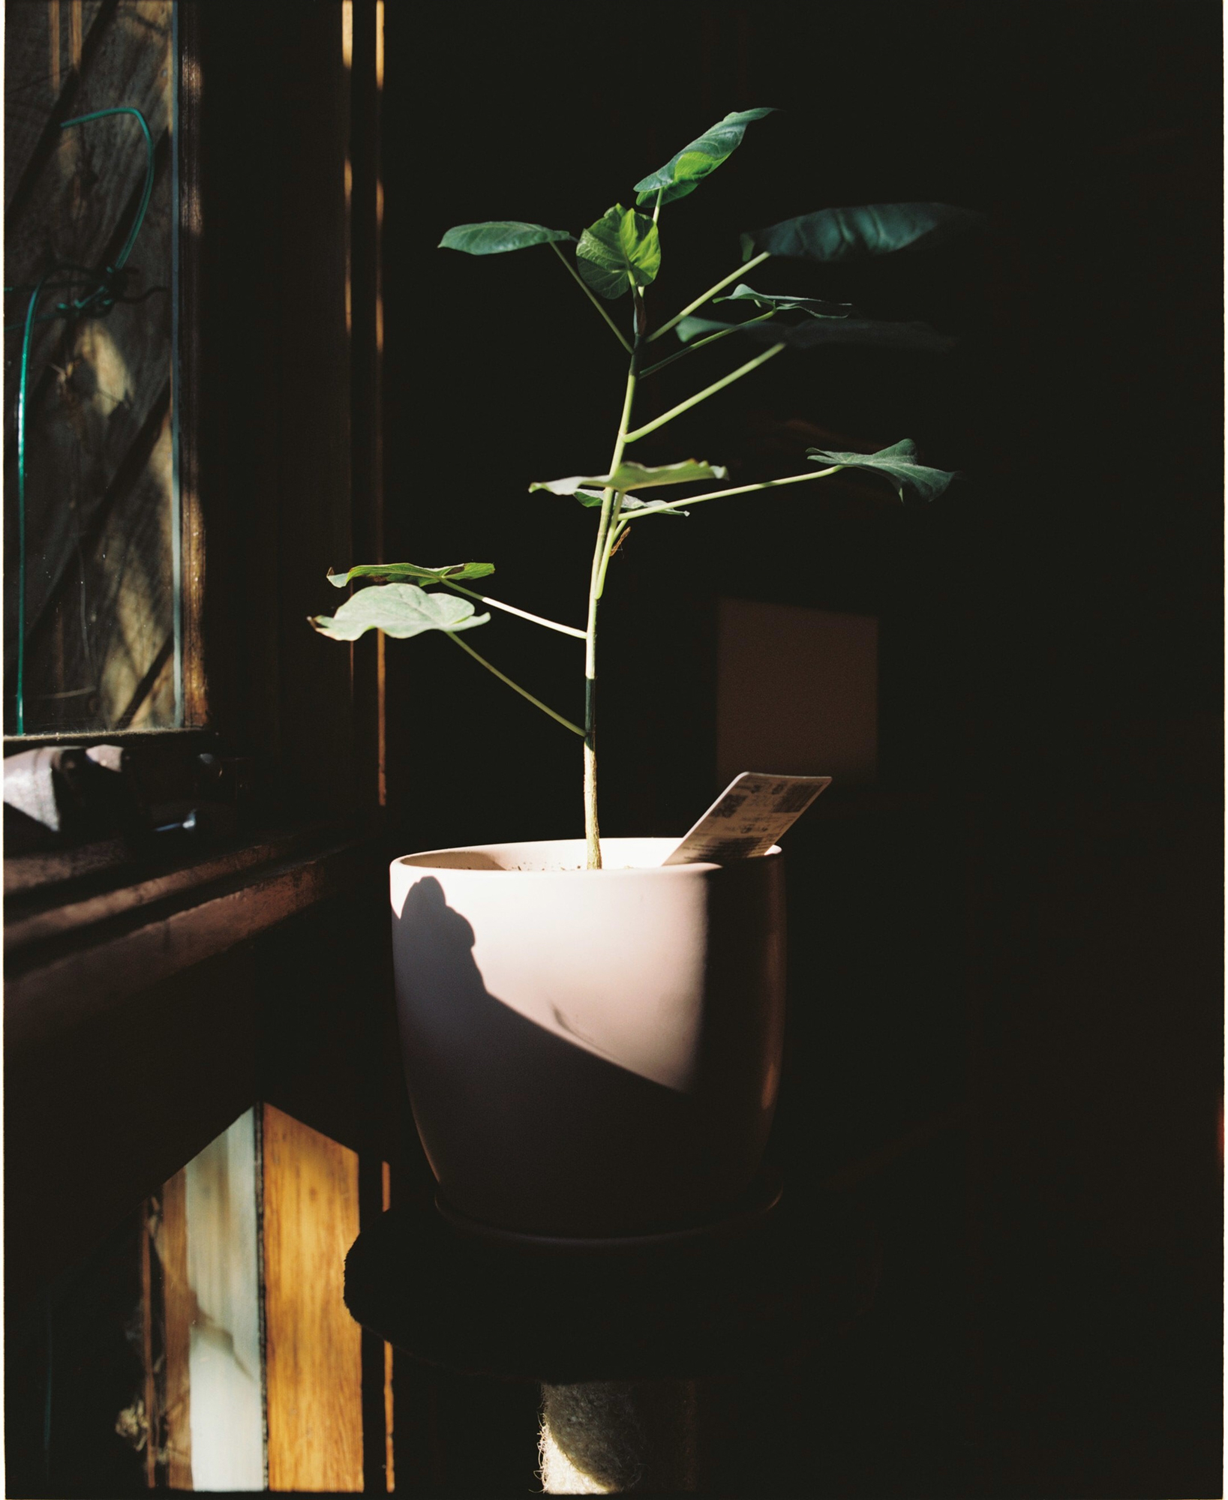 Colour photograph of an indoor house plant covered in dappled light.